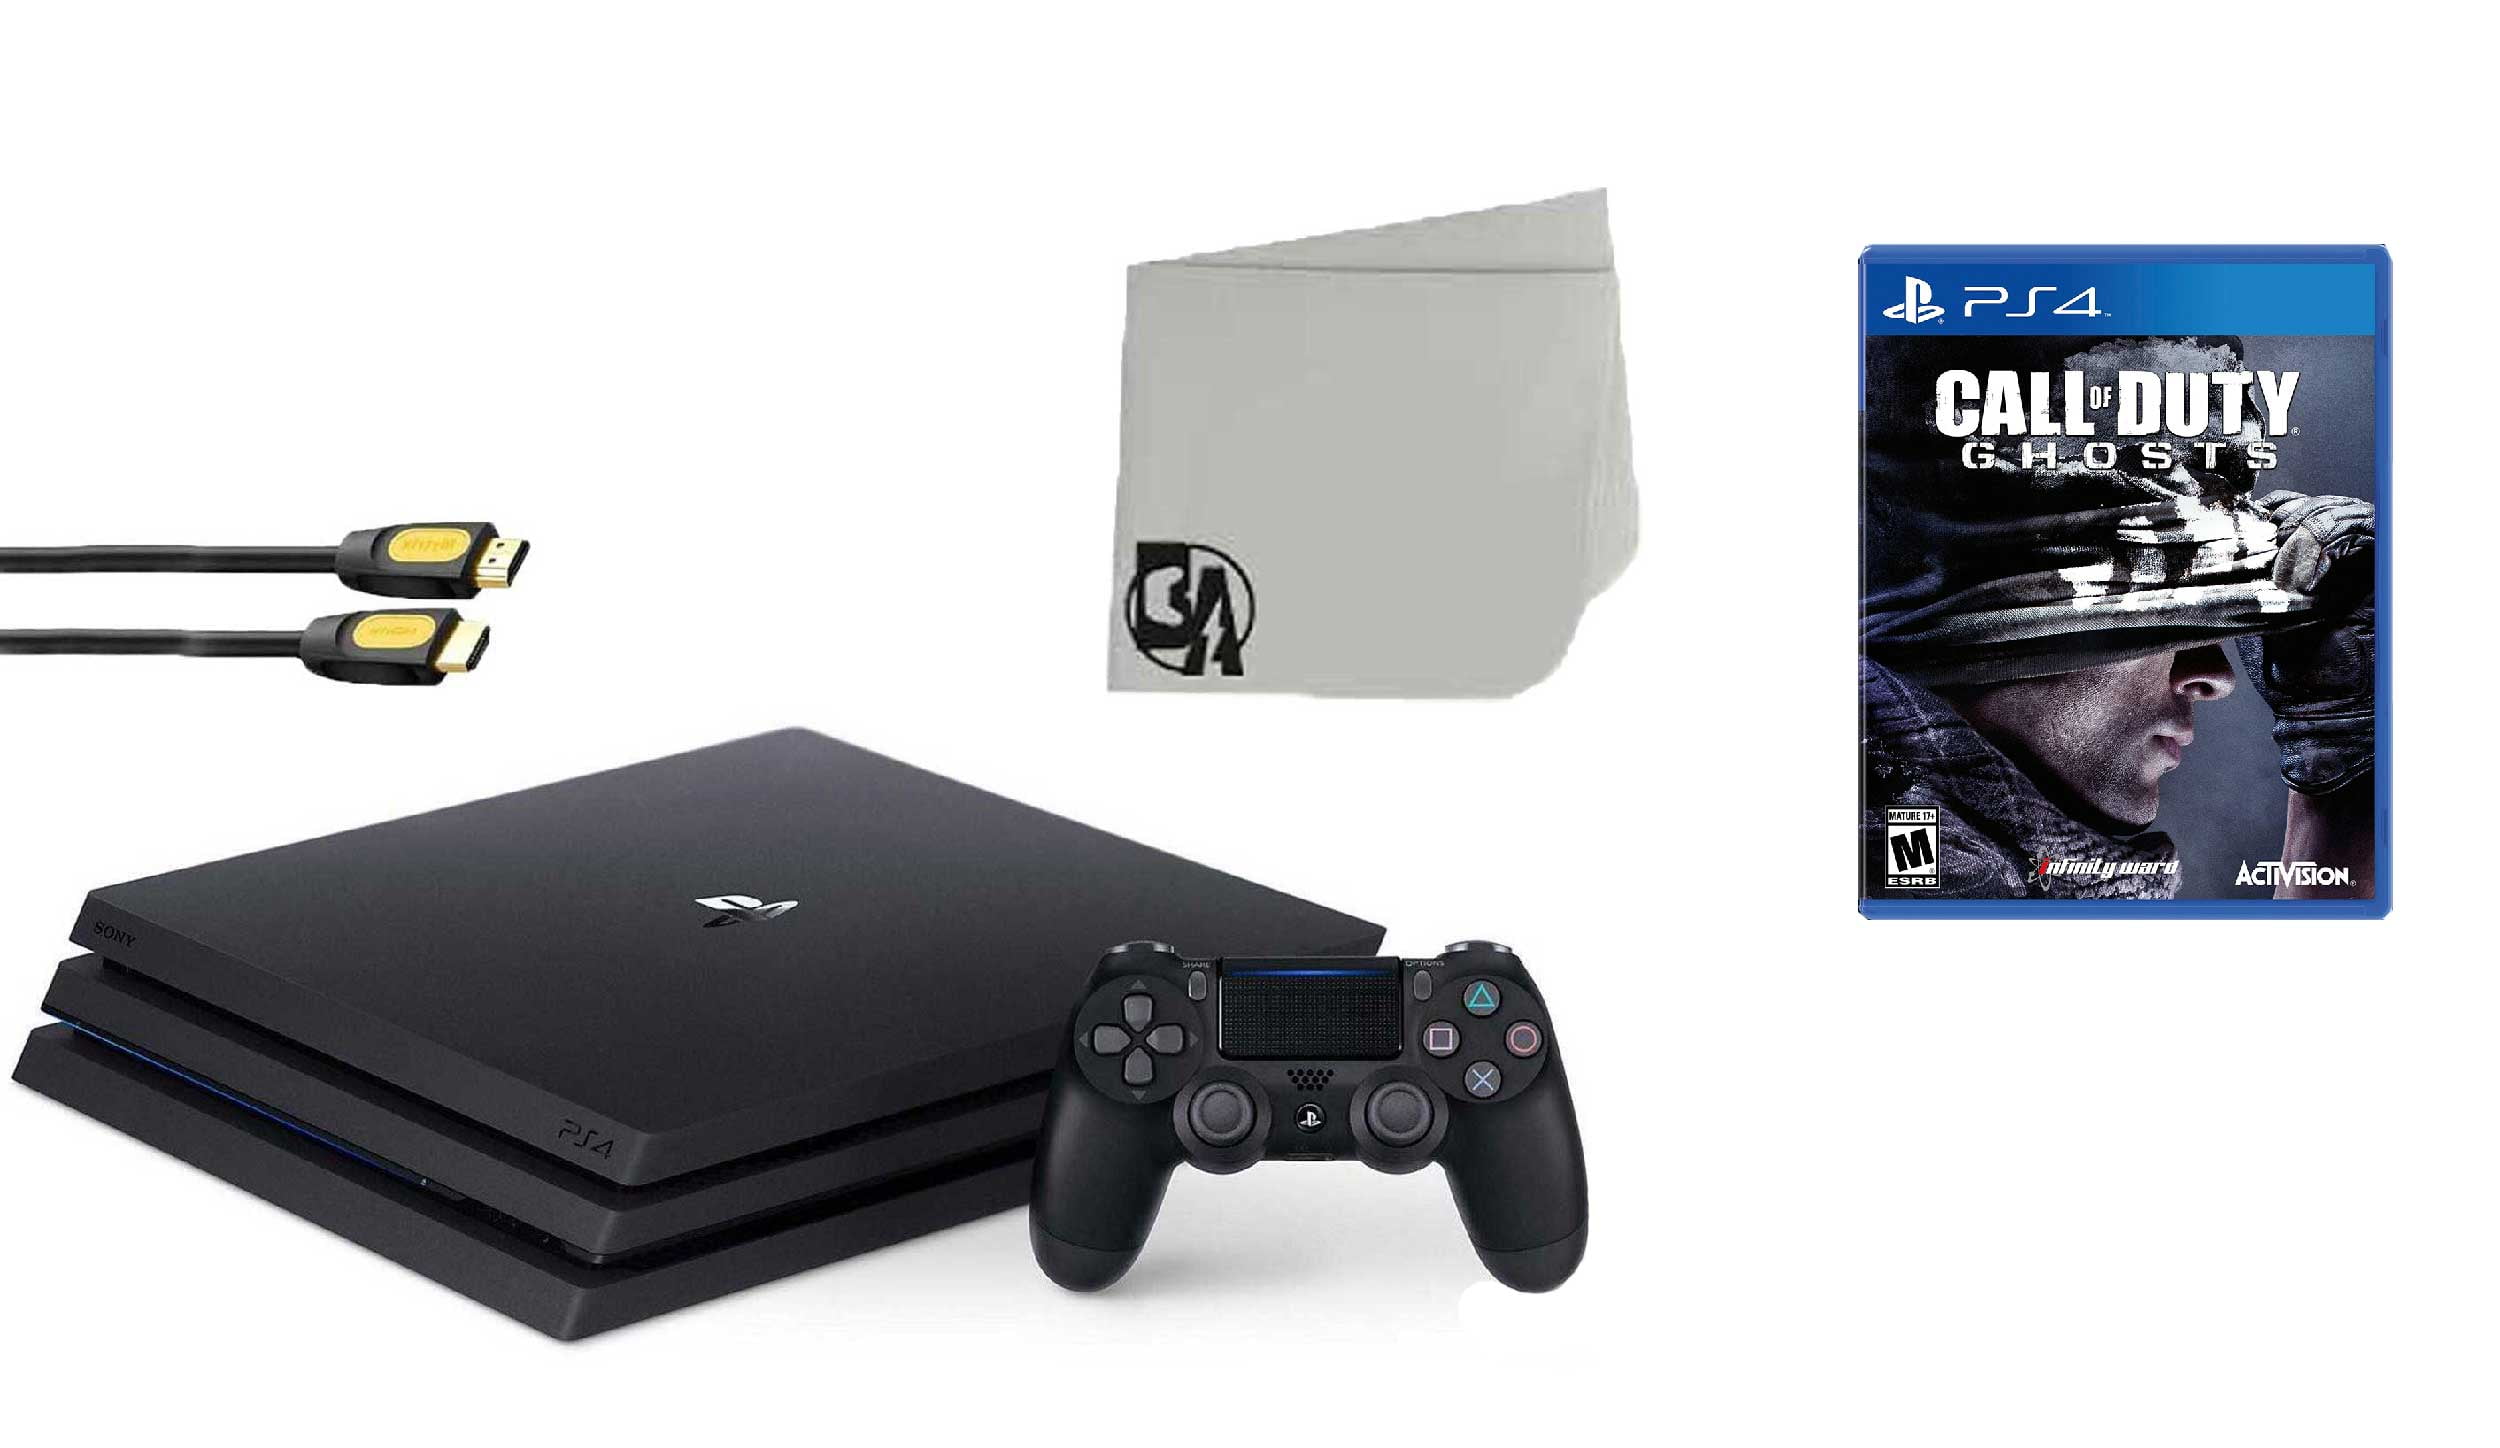 Sony PlayStation 4 PRO Glacier 1TB Gaming Console White with Call of Duty  Ghosts BOLT AXTION Bundle Like New 